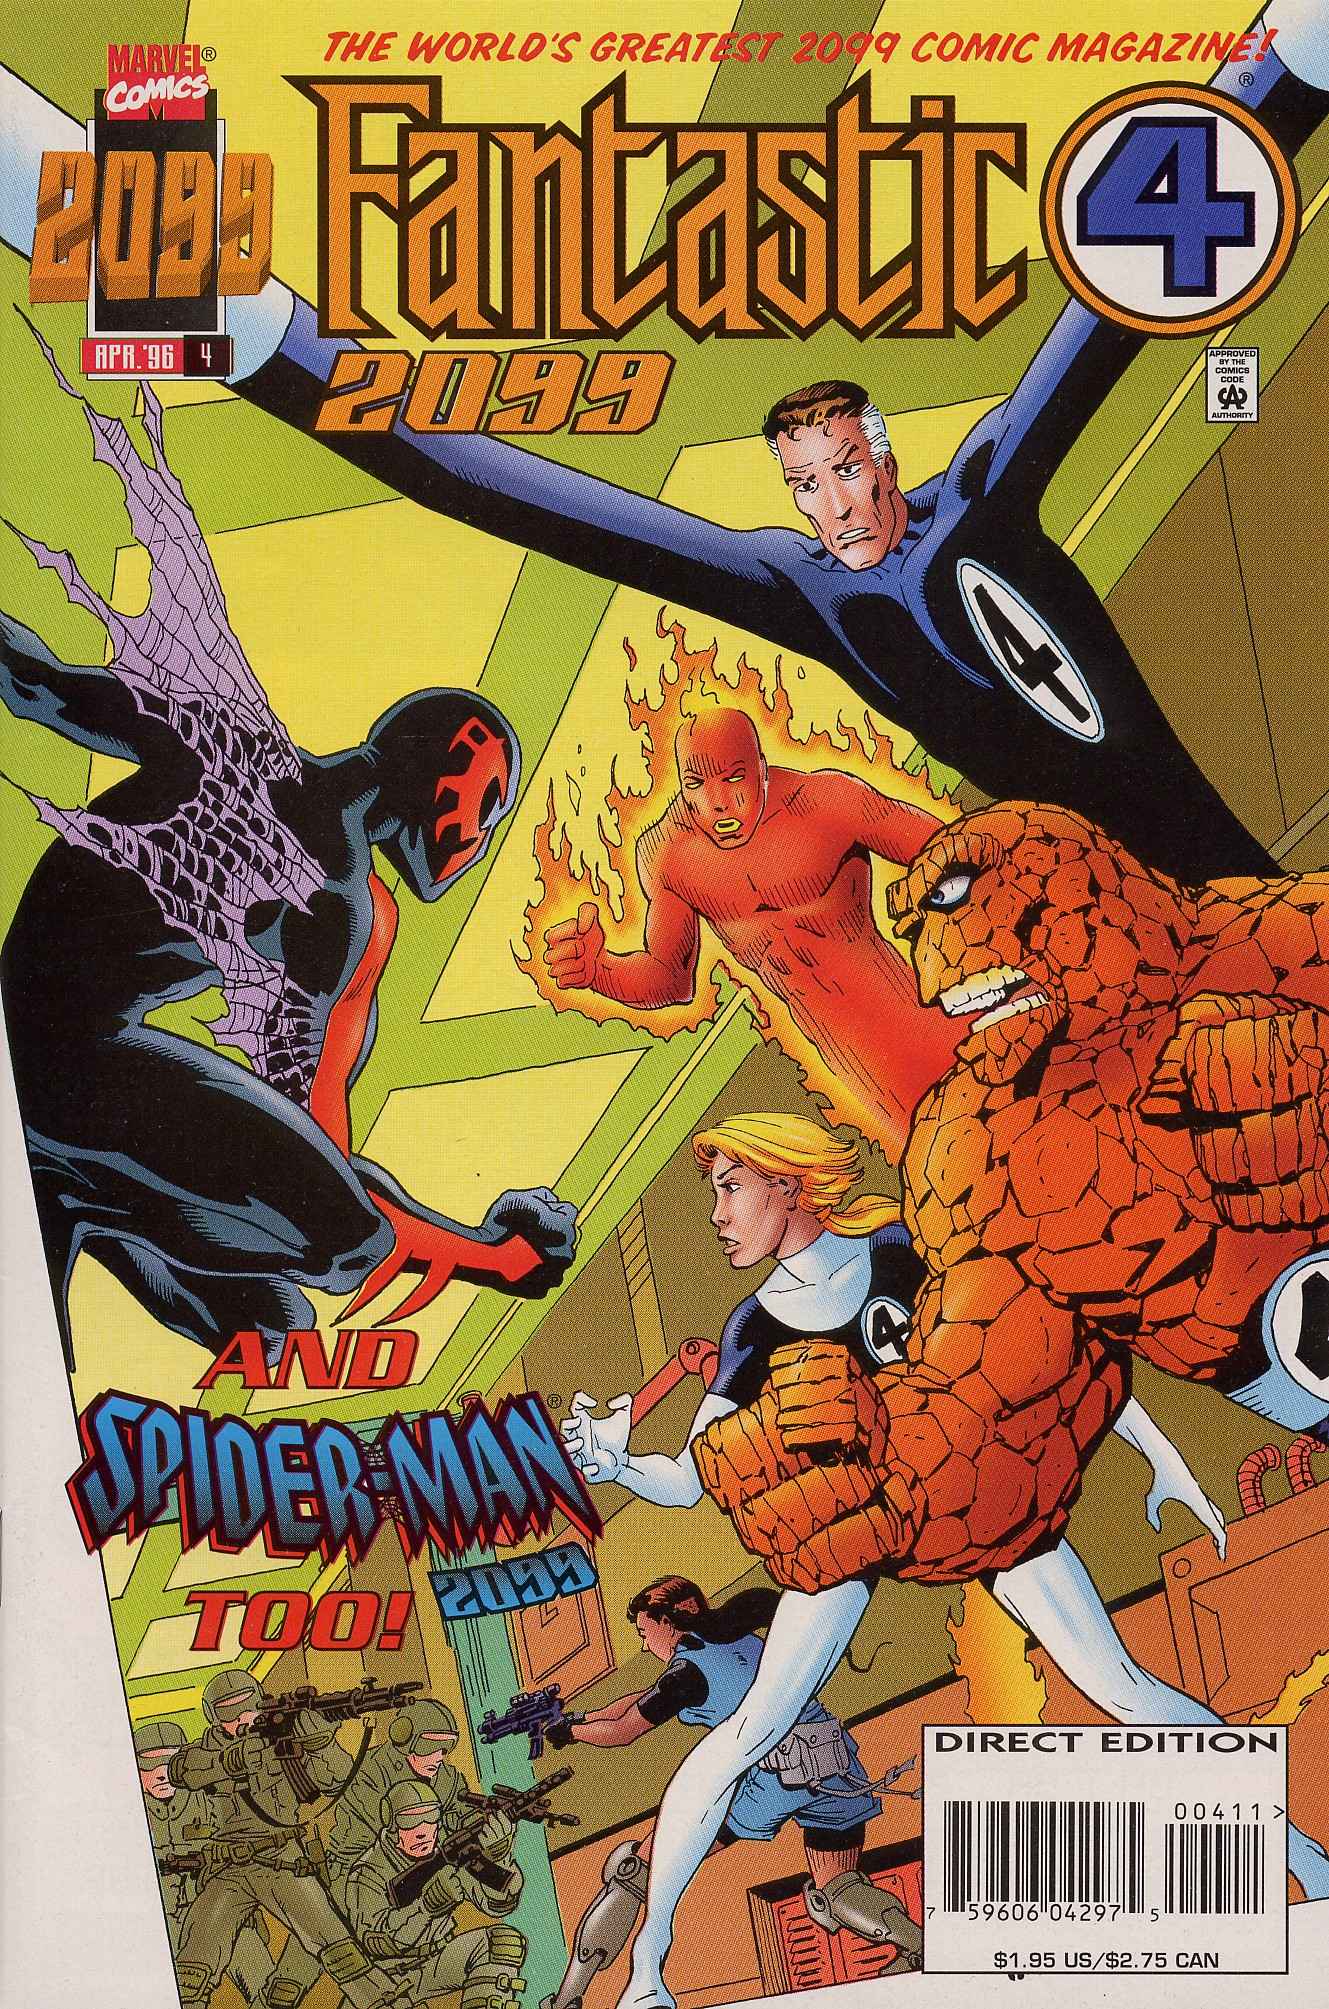 Read online Fantastic Four 2099 comic -  Issue #4 - 1